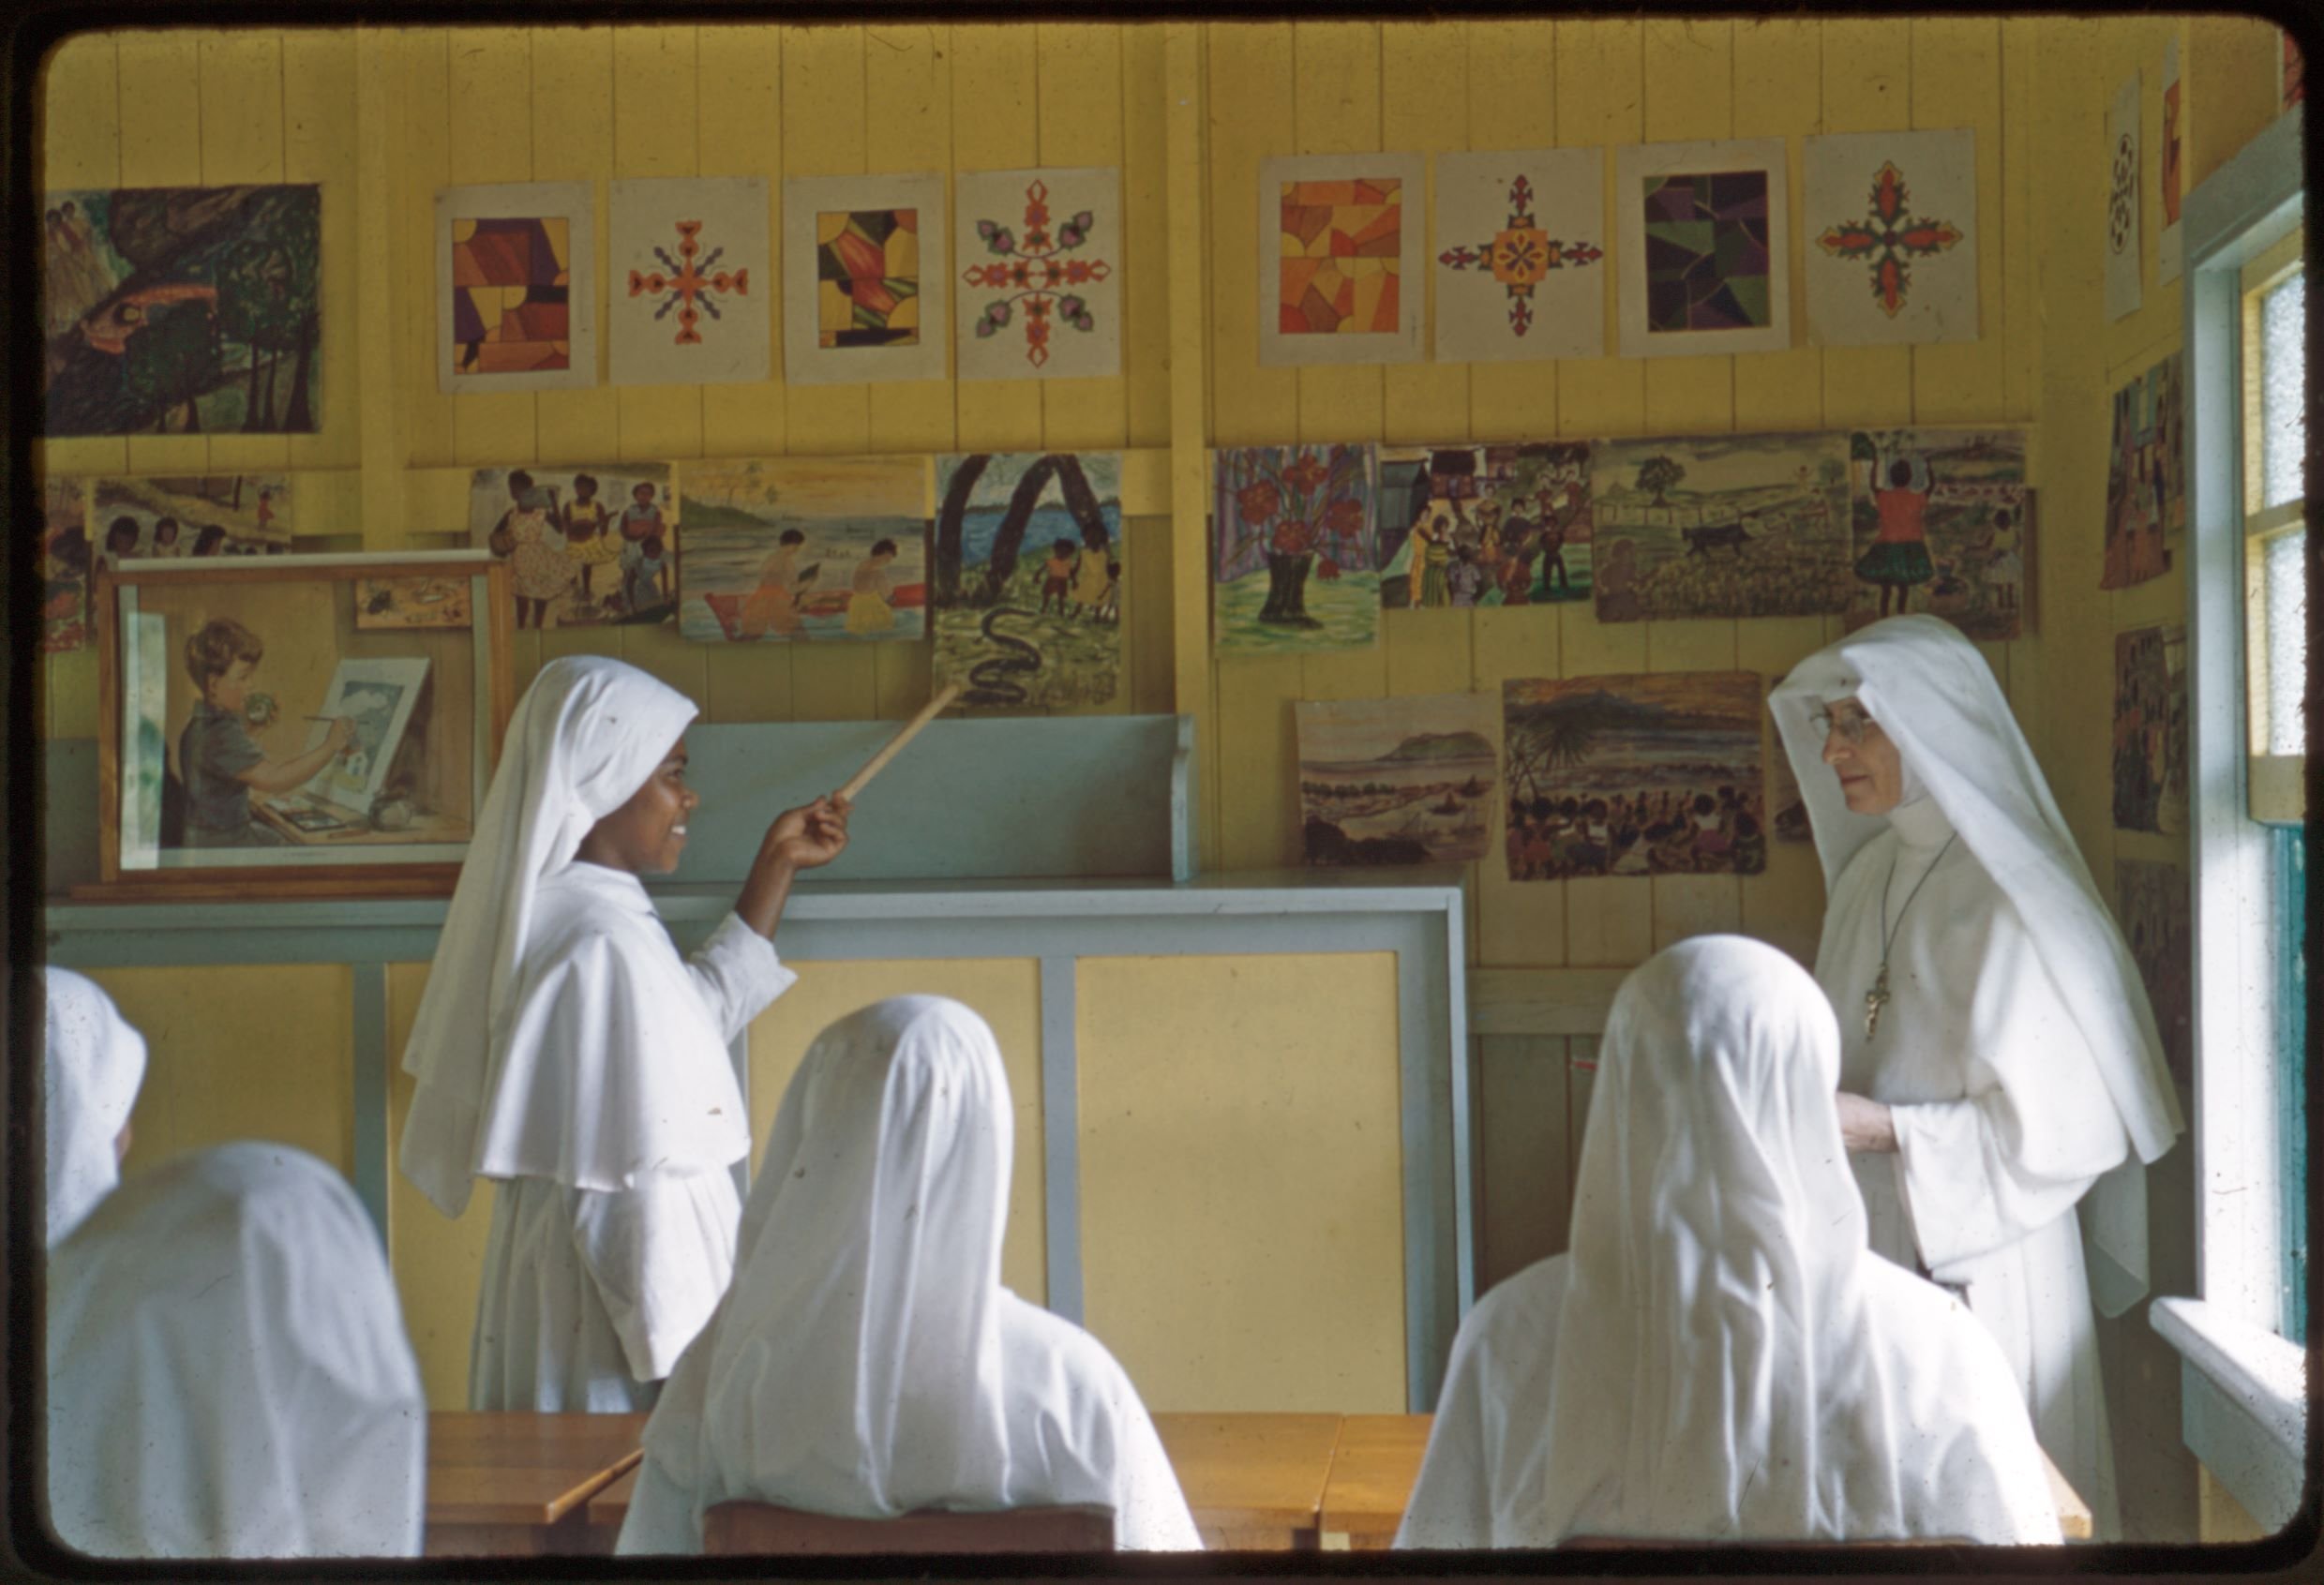 Sr Baptist Whyte and novices during an art lesson, ca 1958-ca 1961